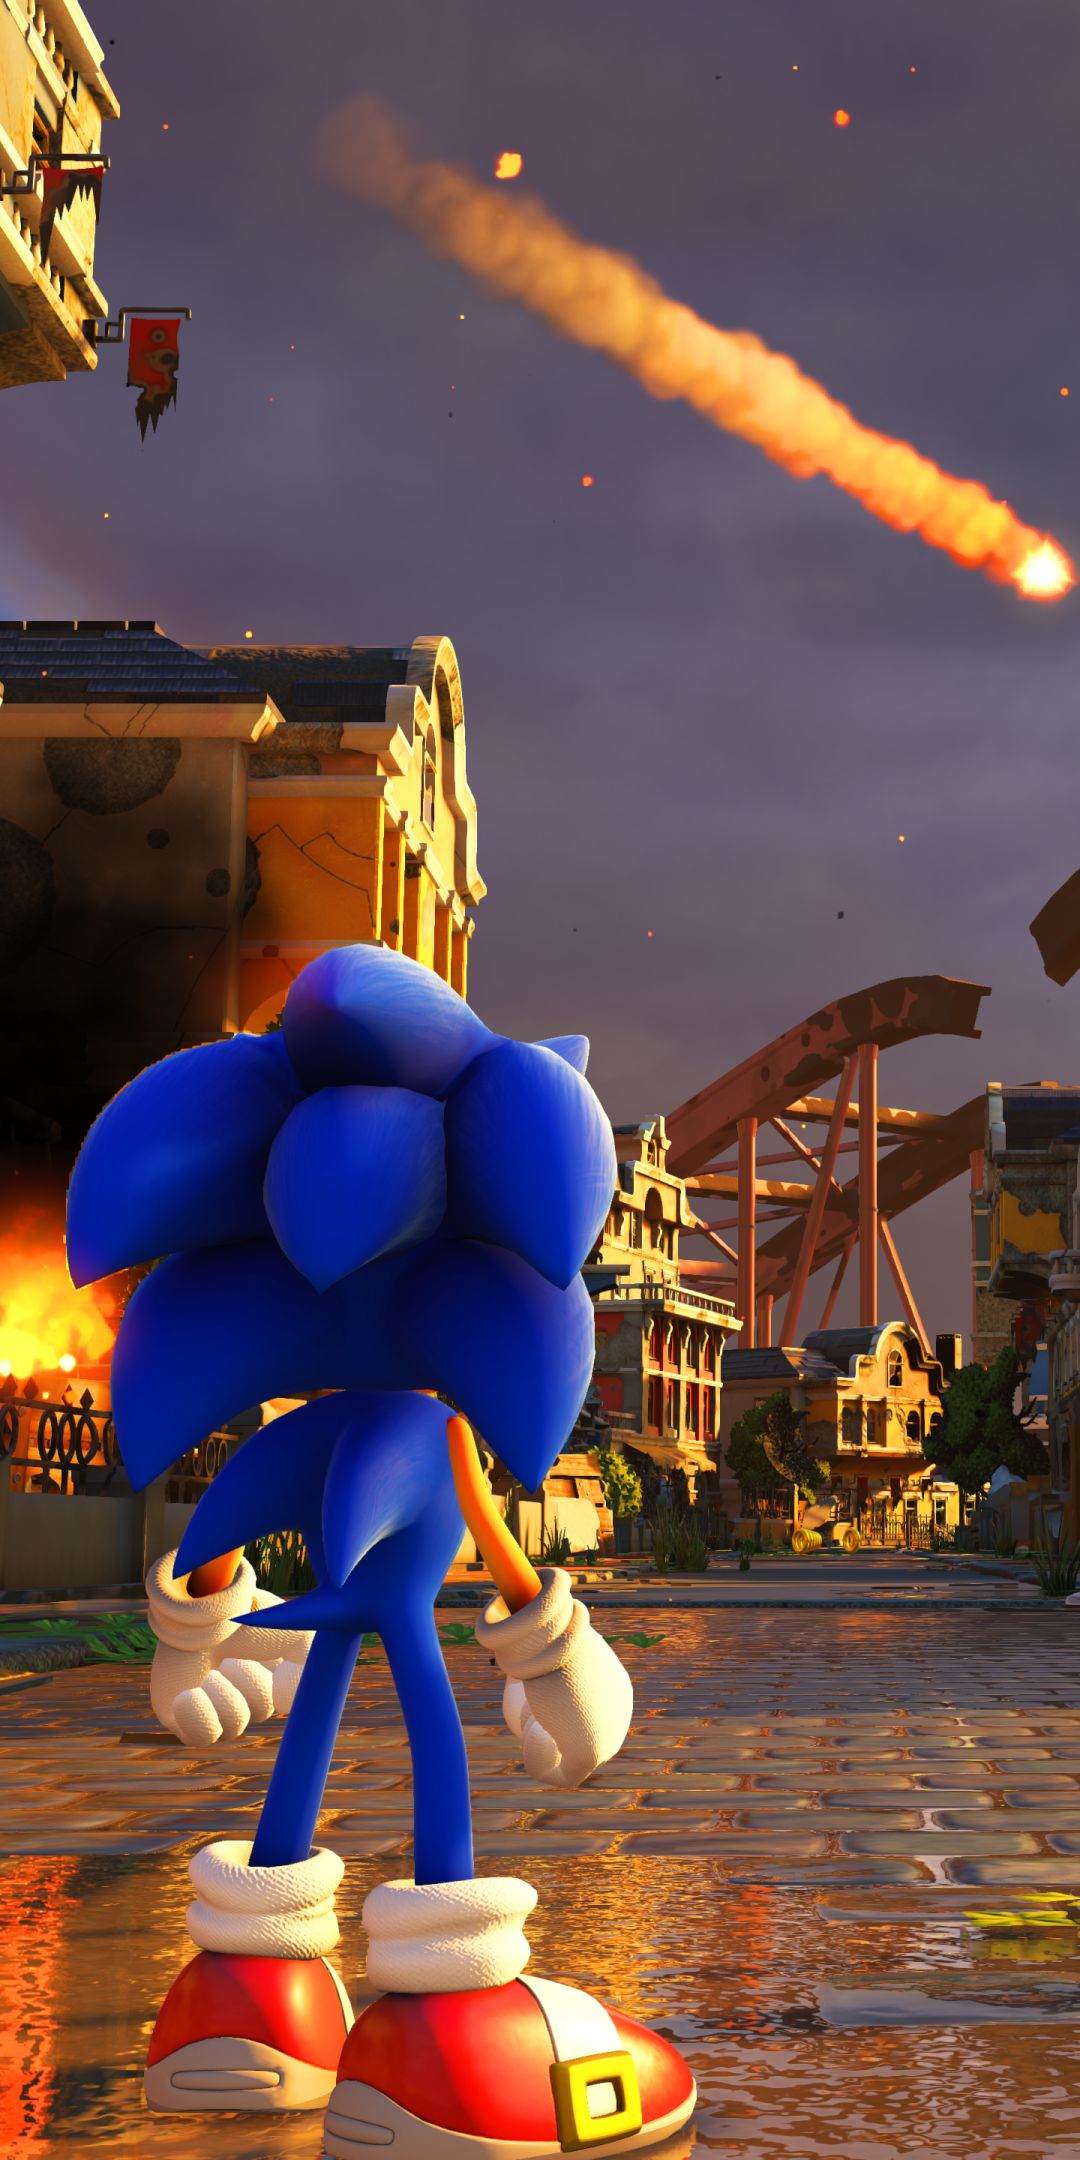 sonic forces, video game, sonic the hedgehog, sonic 2160p